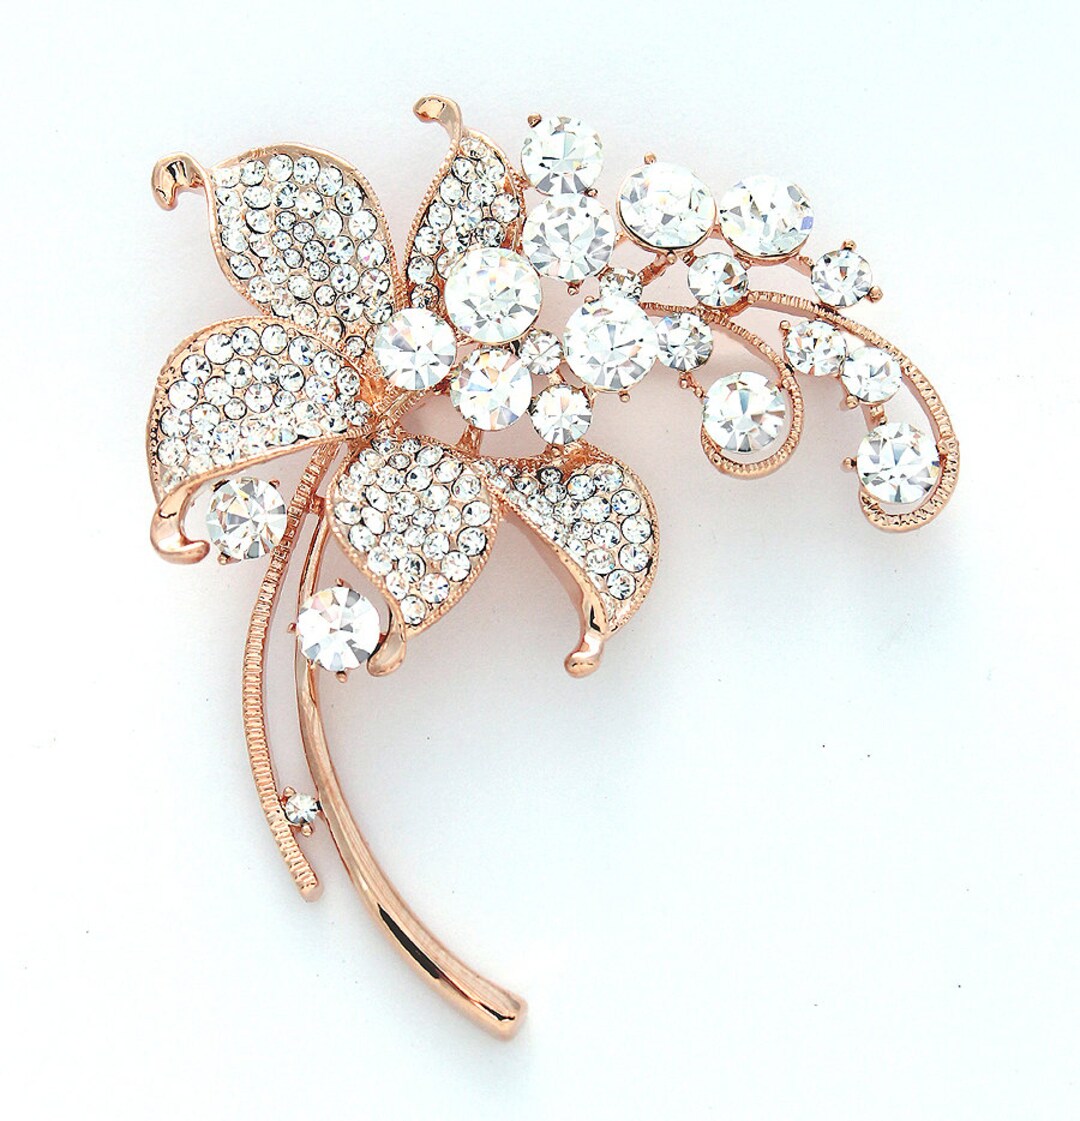 Lilylin Designs Lady with Crystal Hat Brooch Pin in Rose Gold - PRF519